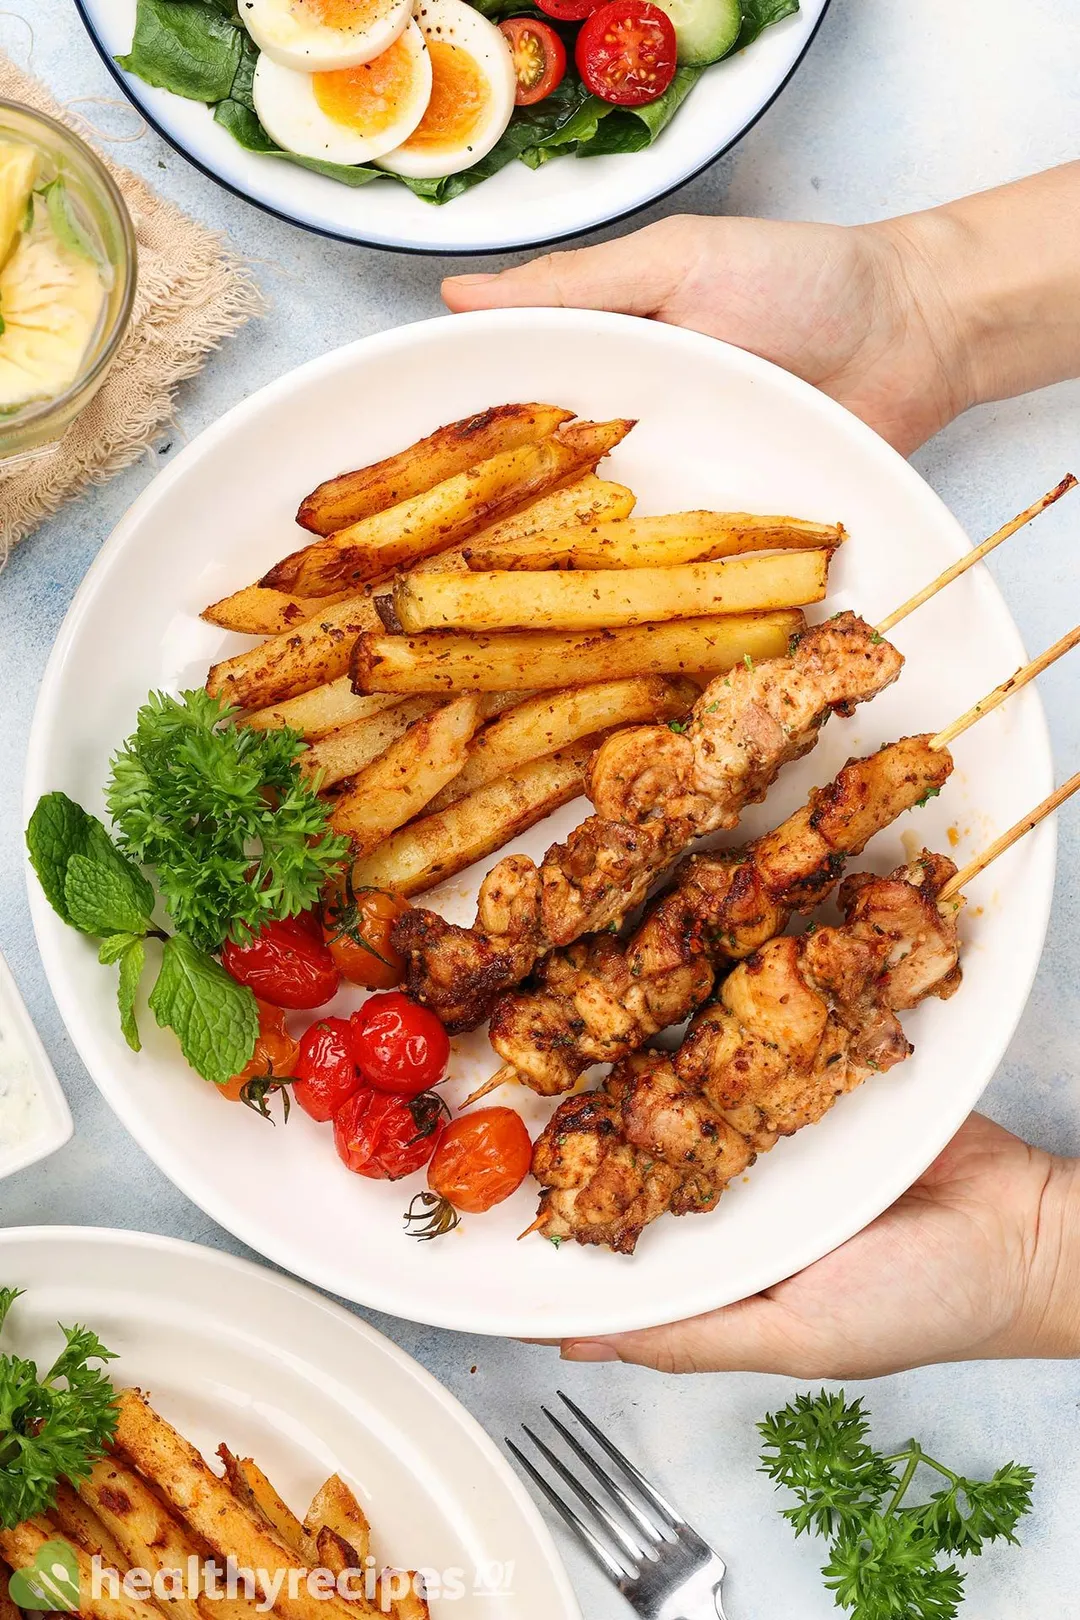 hand holds a plate of cooked chicken skewers and potato batonnet, cherry tomato